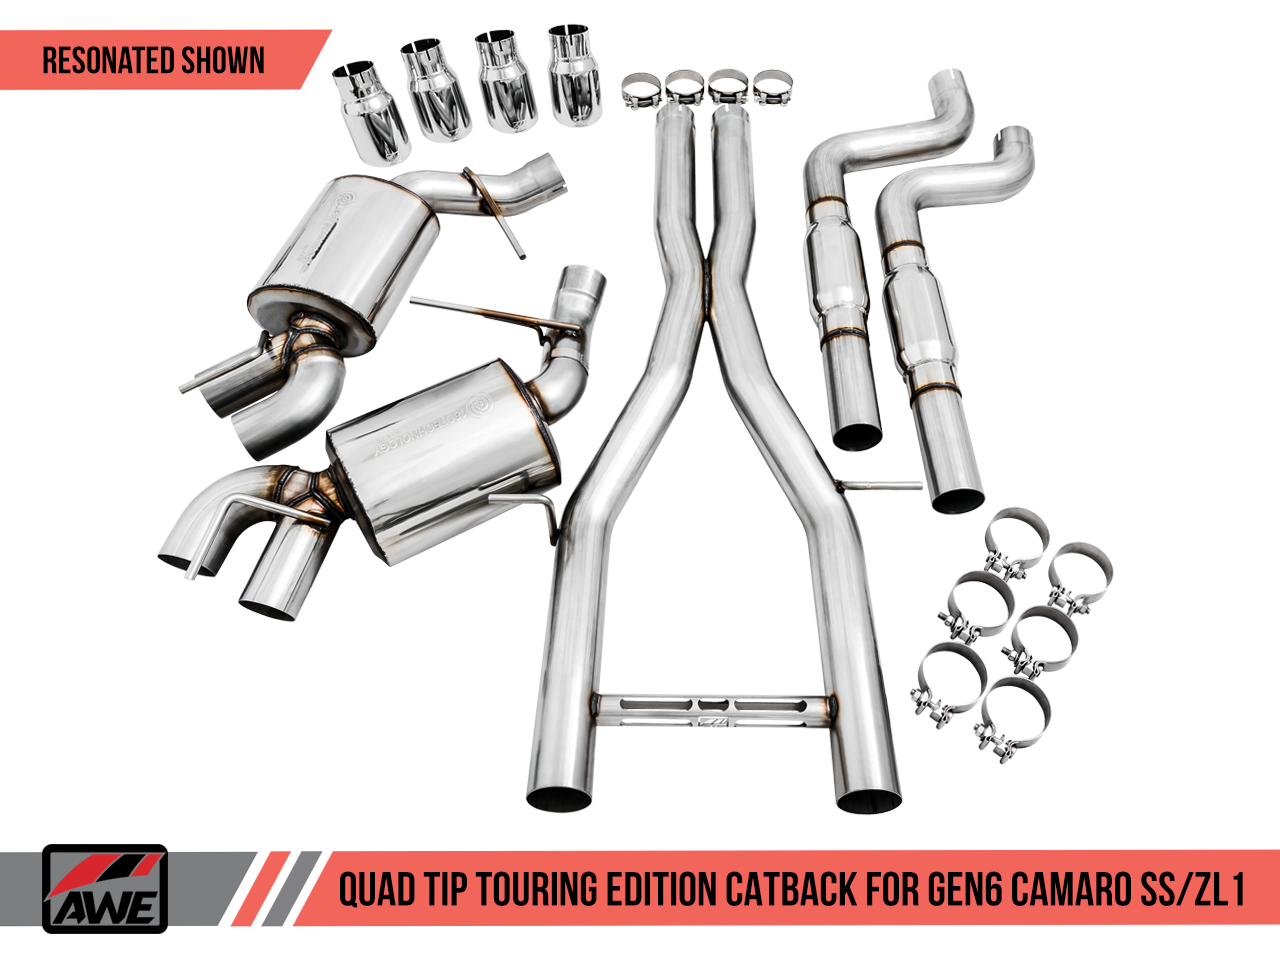 AWE Tuning Touring Edition Catback Exhaust for Gen6 Camaro SS / ZL1 - Resonated - Chrome Silver Tips (Quad Outlet)